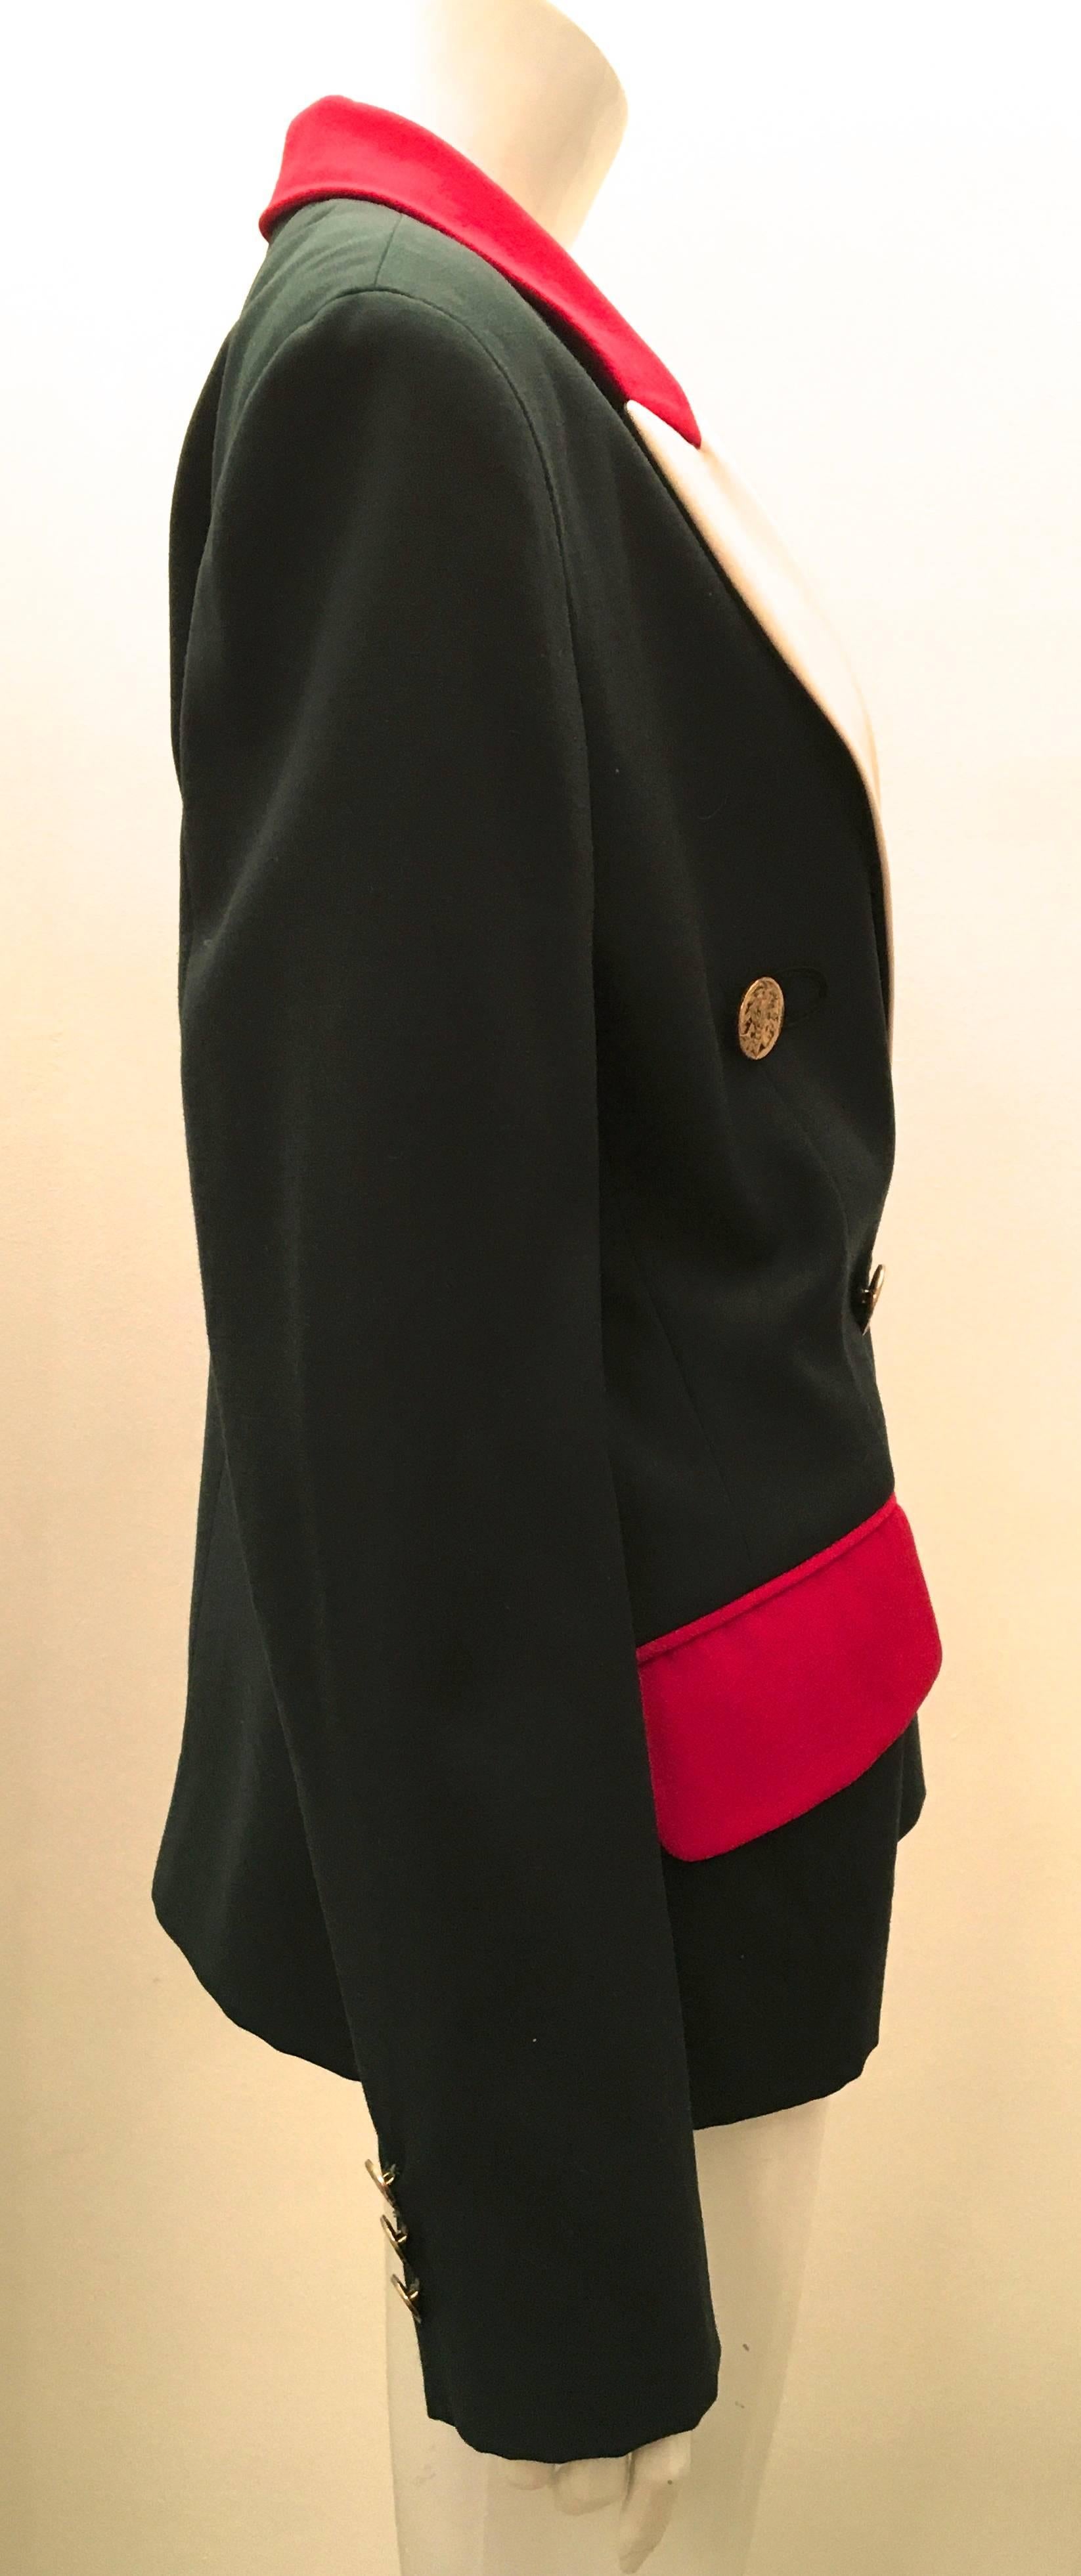 Presented here is a magnificent blazer from Moschino. The blazer is a forest green color  with each of the two pocket flaps on the front of the blazer with red fabric. The lapels are a creamy beige and the color of the color transitions to red as it